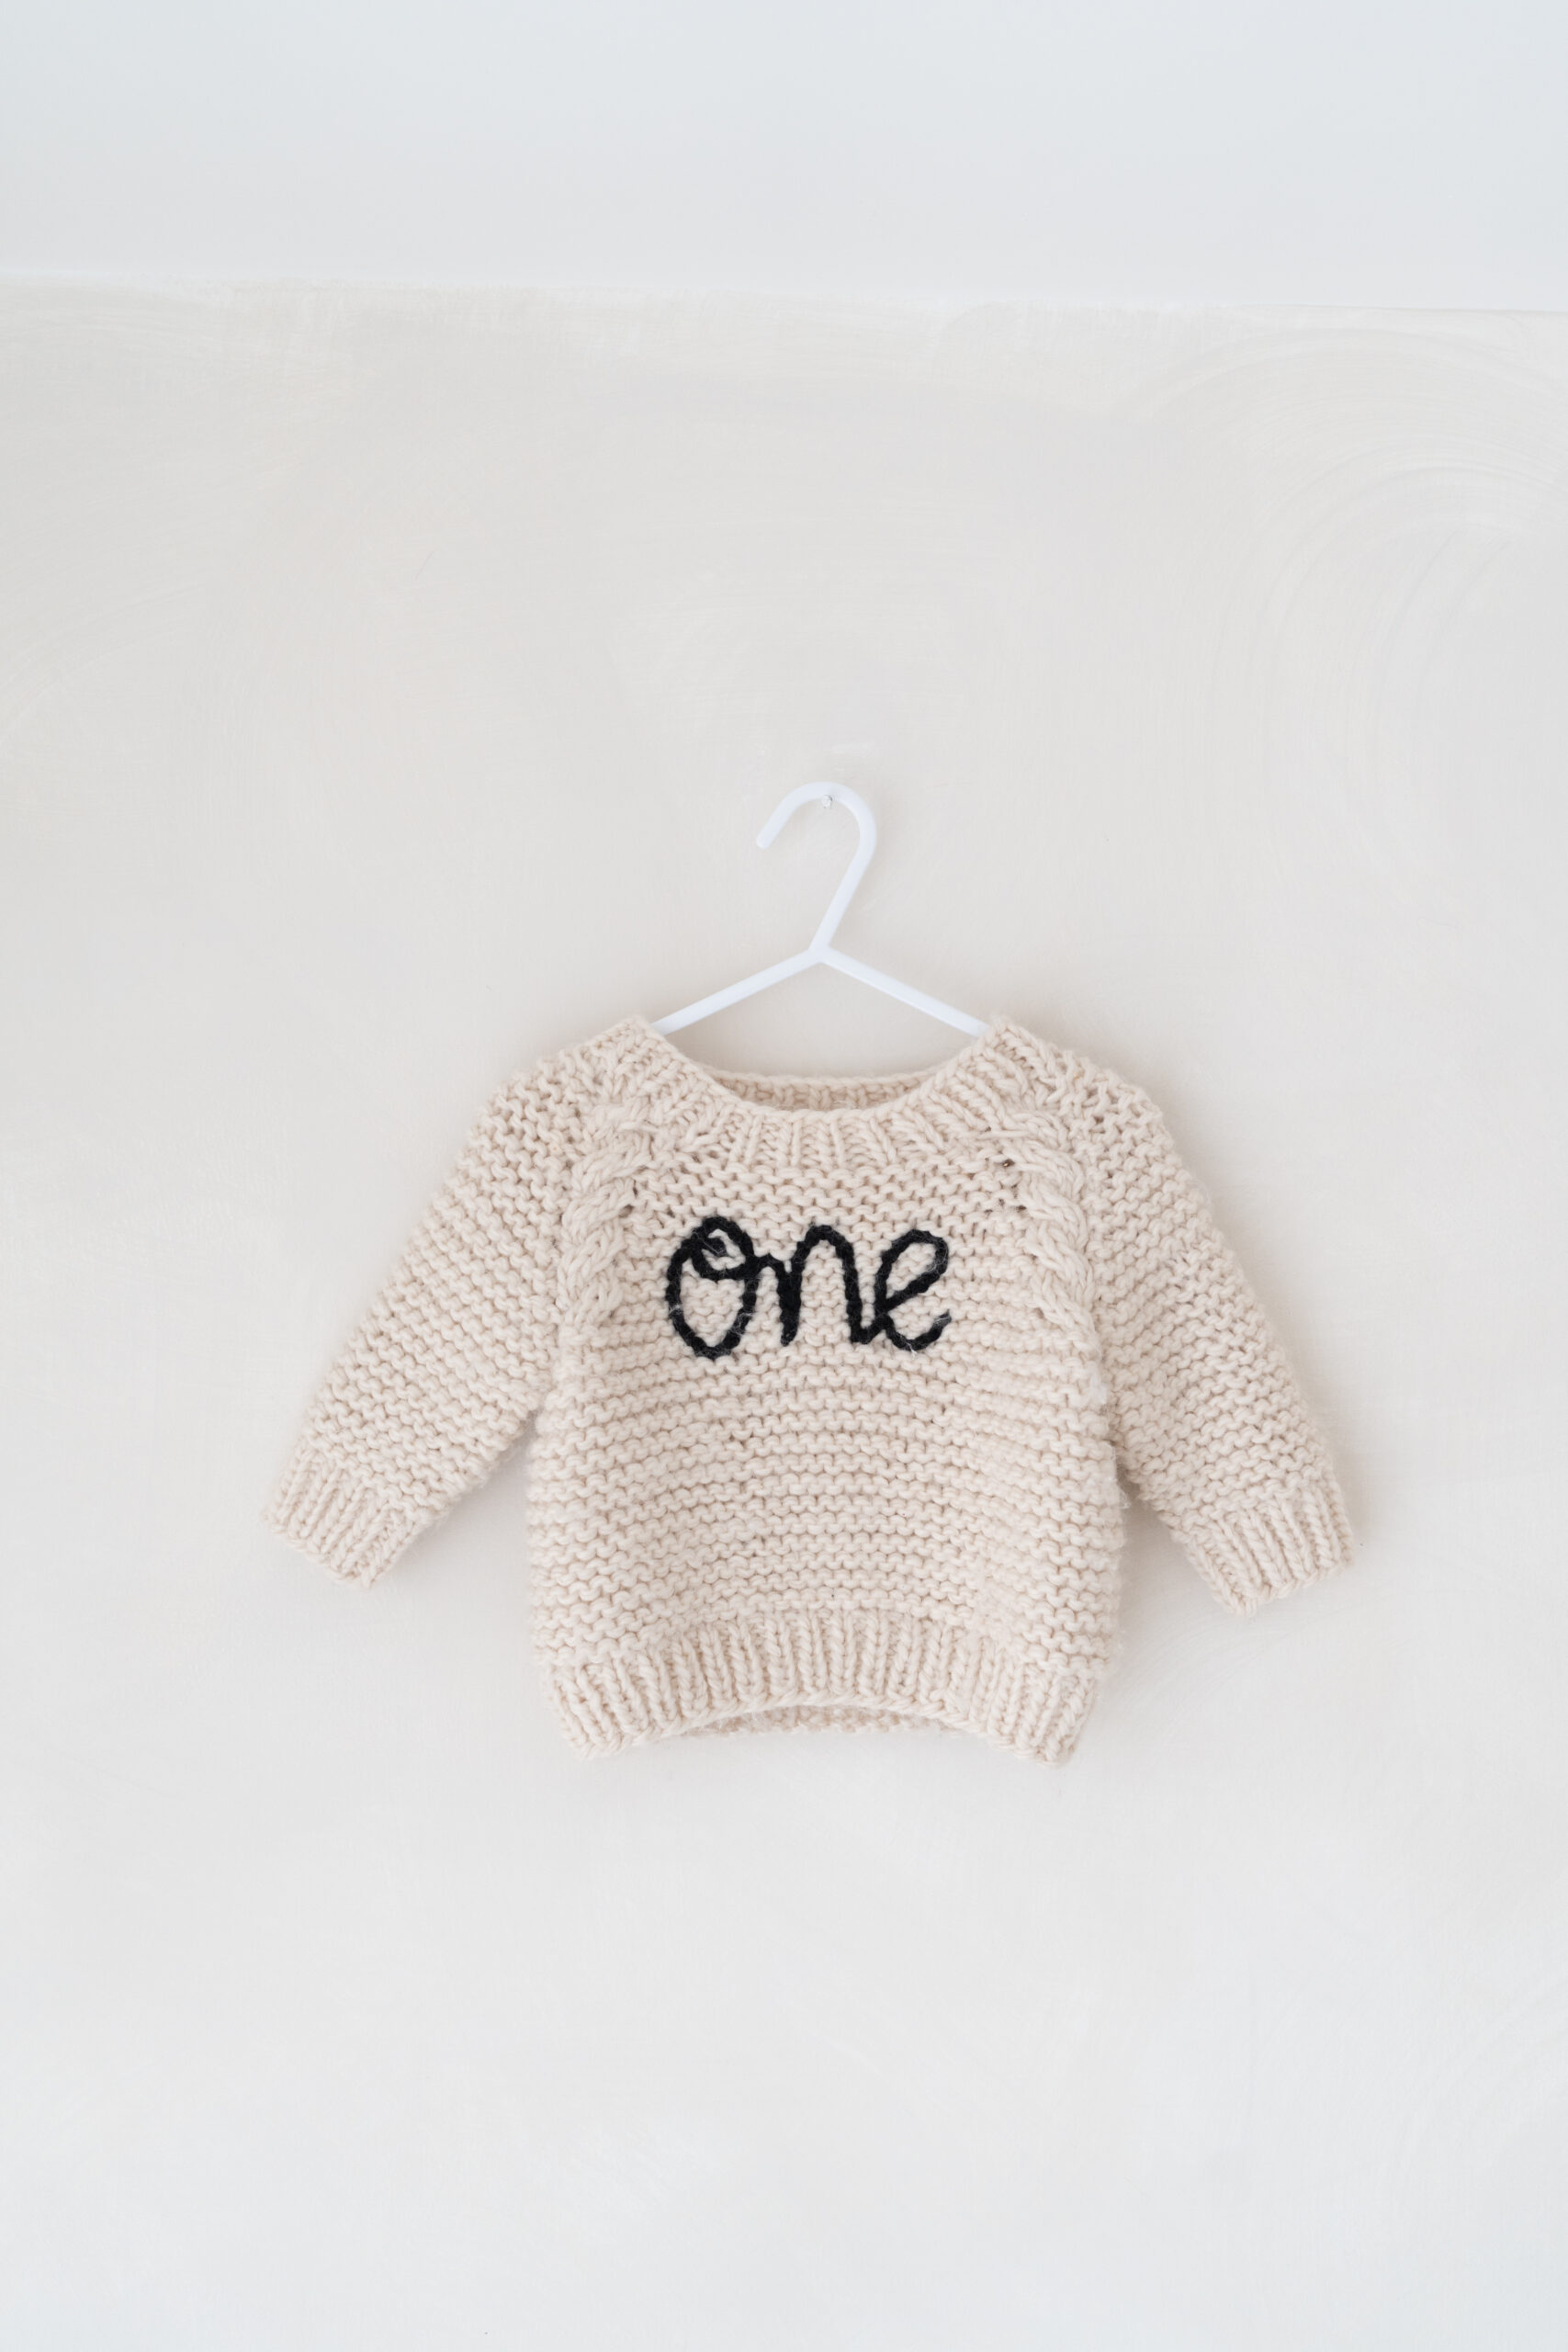 ONE jumper part of the studio wardrobe for first birthday photoshoots.